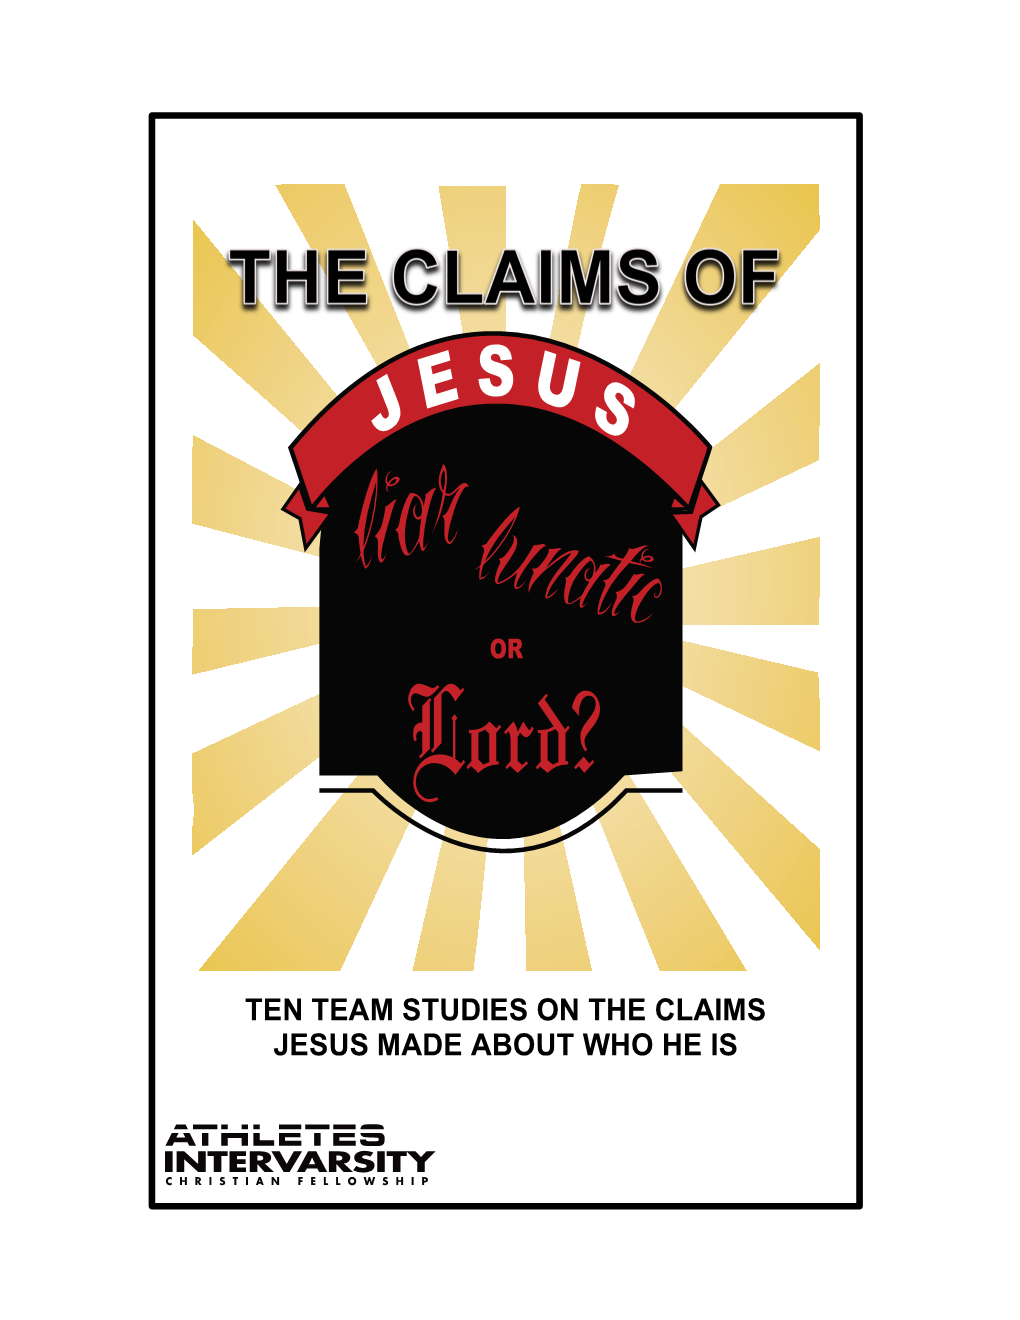 Ten Team Studies on the Claims Jesus Made About Who He Is